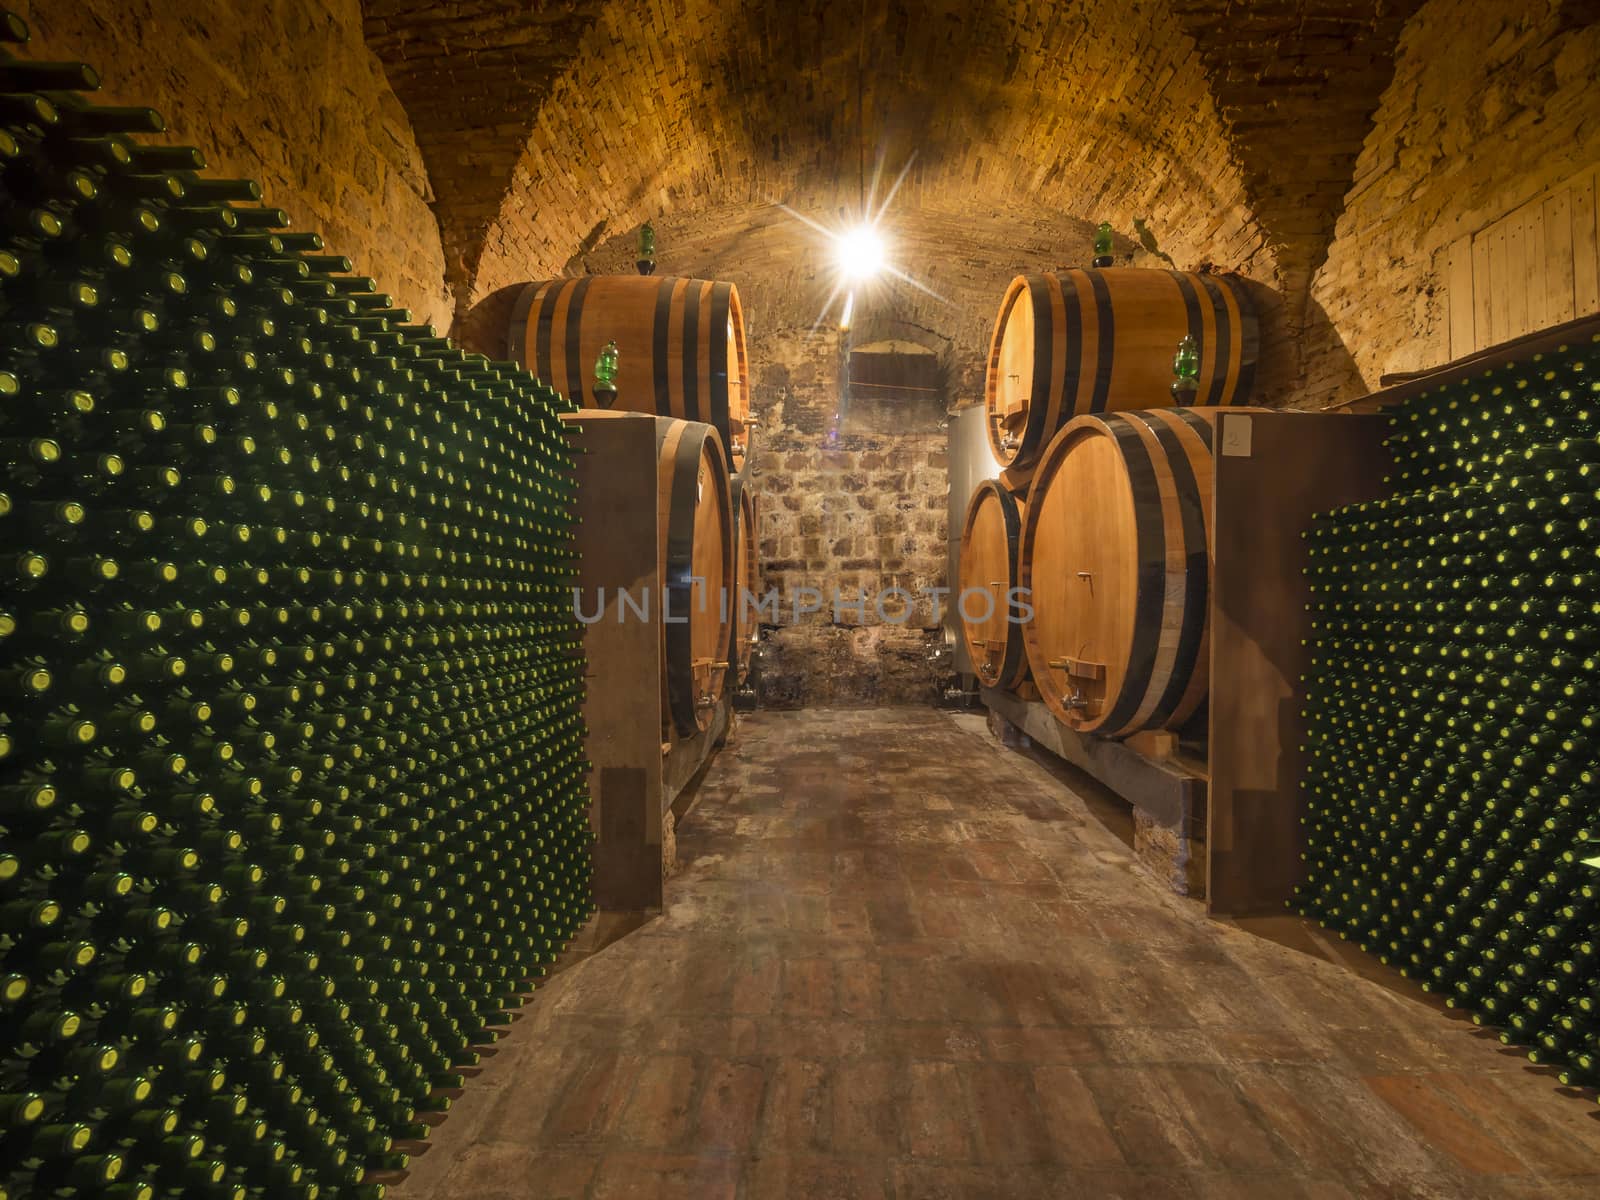 Wine bottles and barrels by f/2sumicron